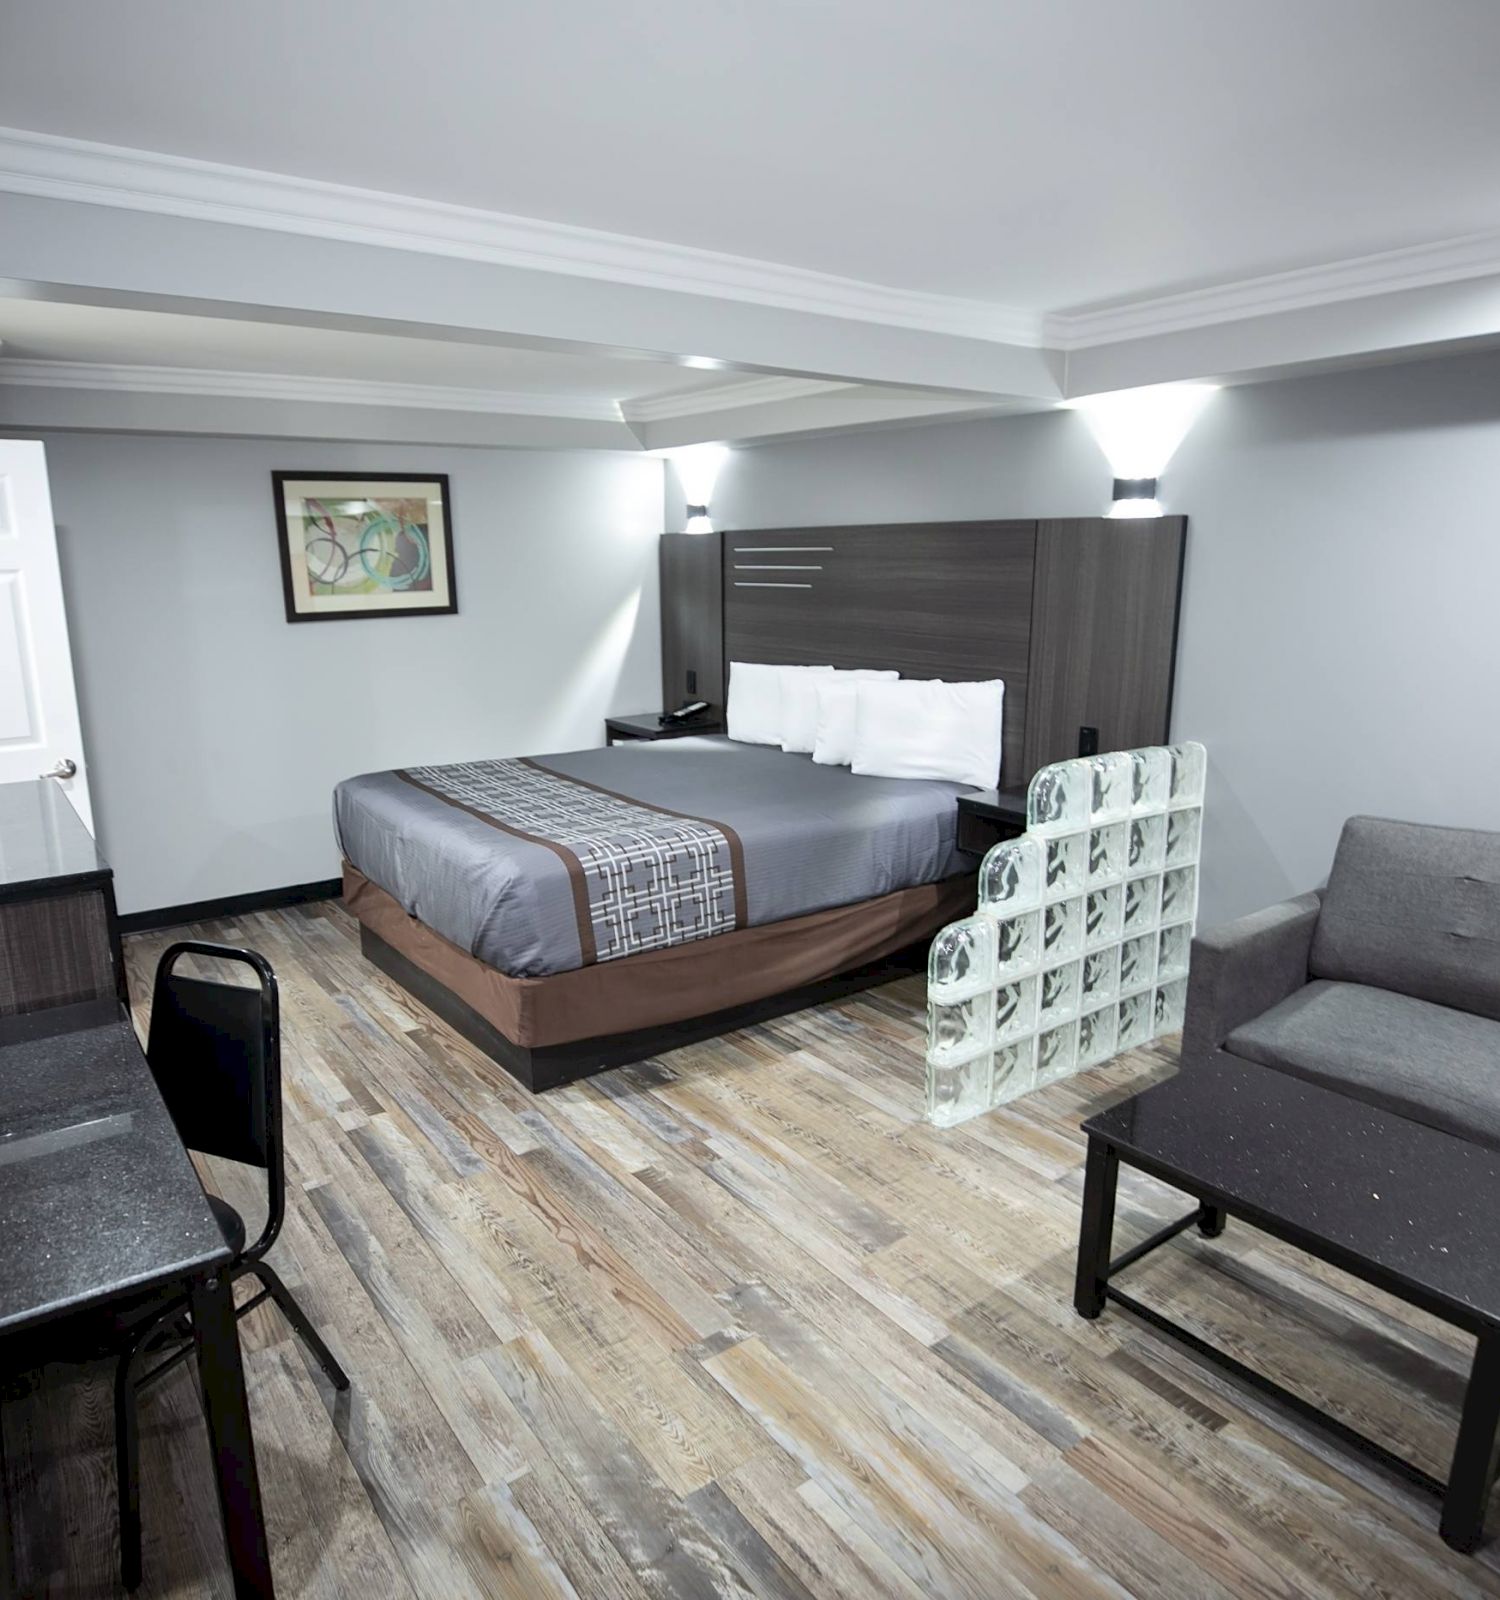 A modern hotel room with a bed, sofa, desk, and TV, featuring wood flooring, a framed picture on the wall, and contemporary furnishings.